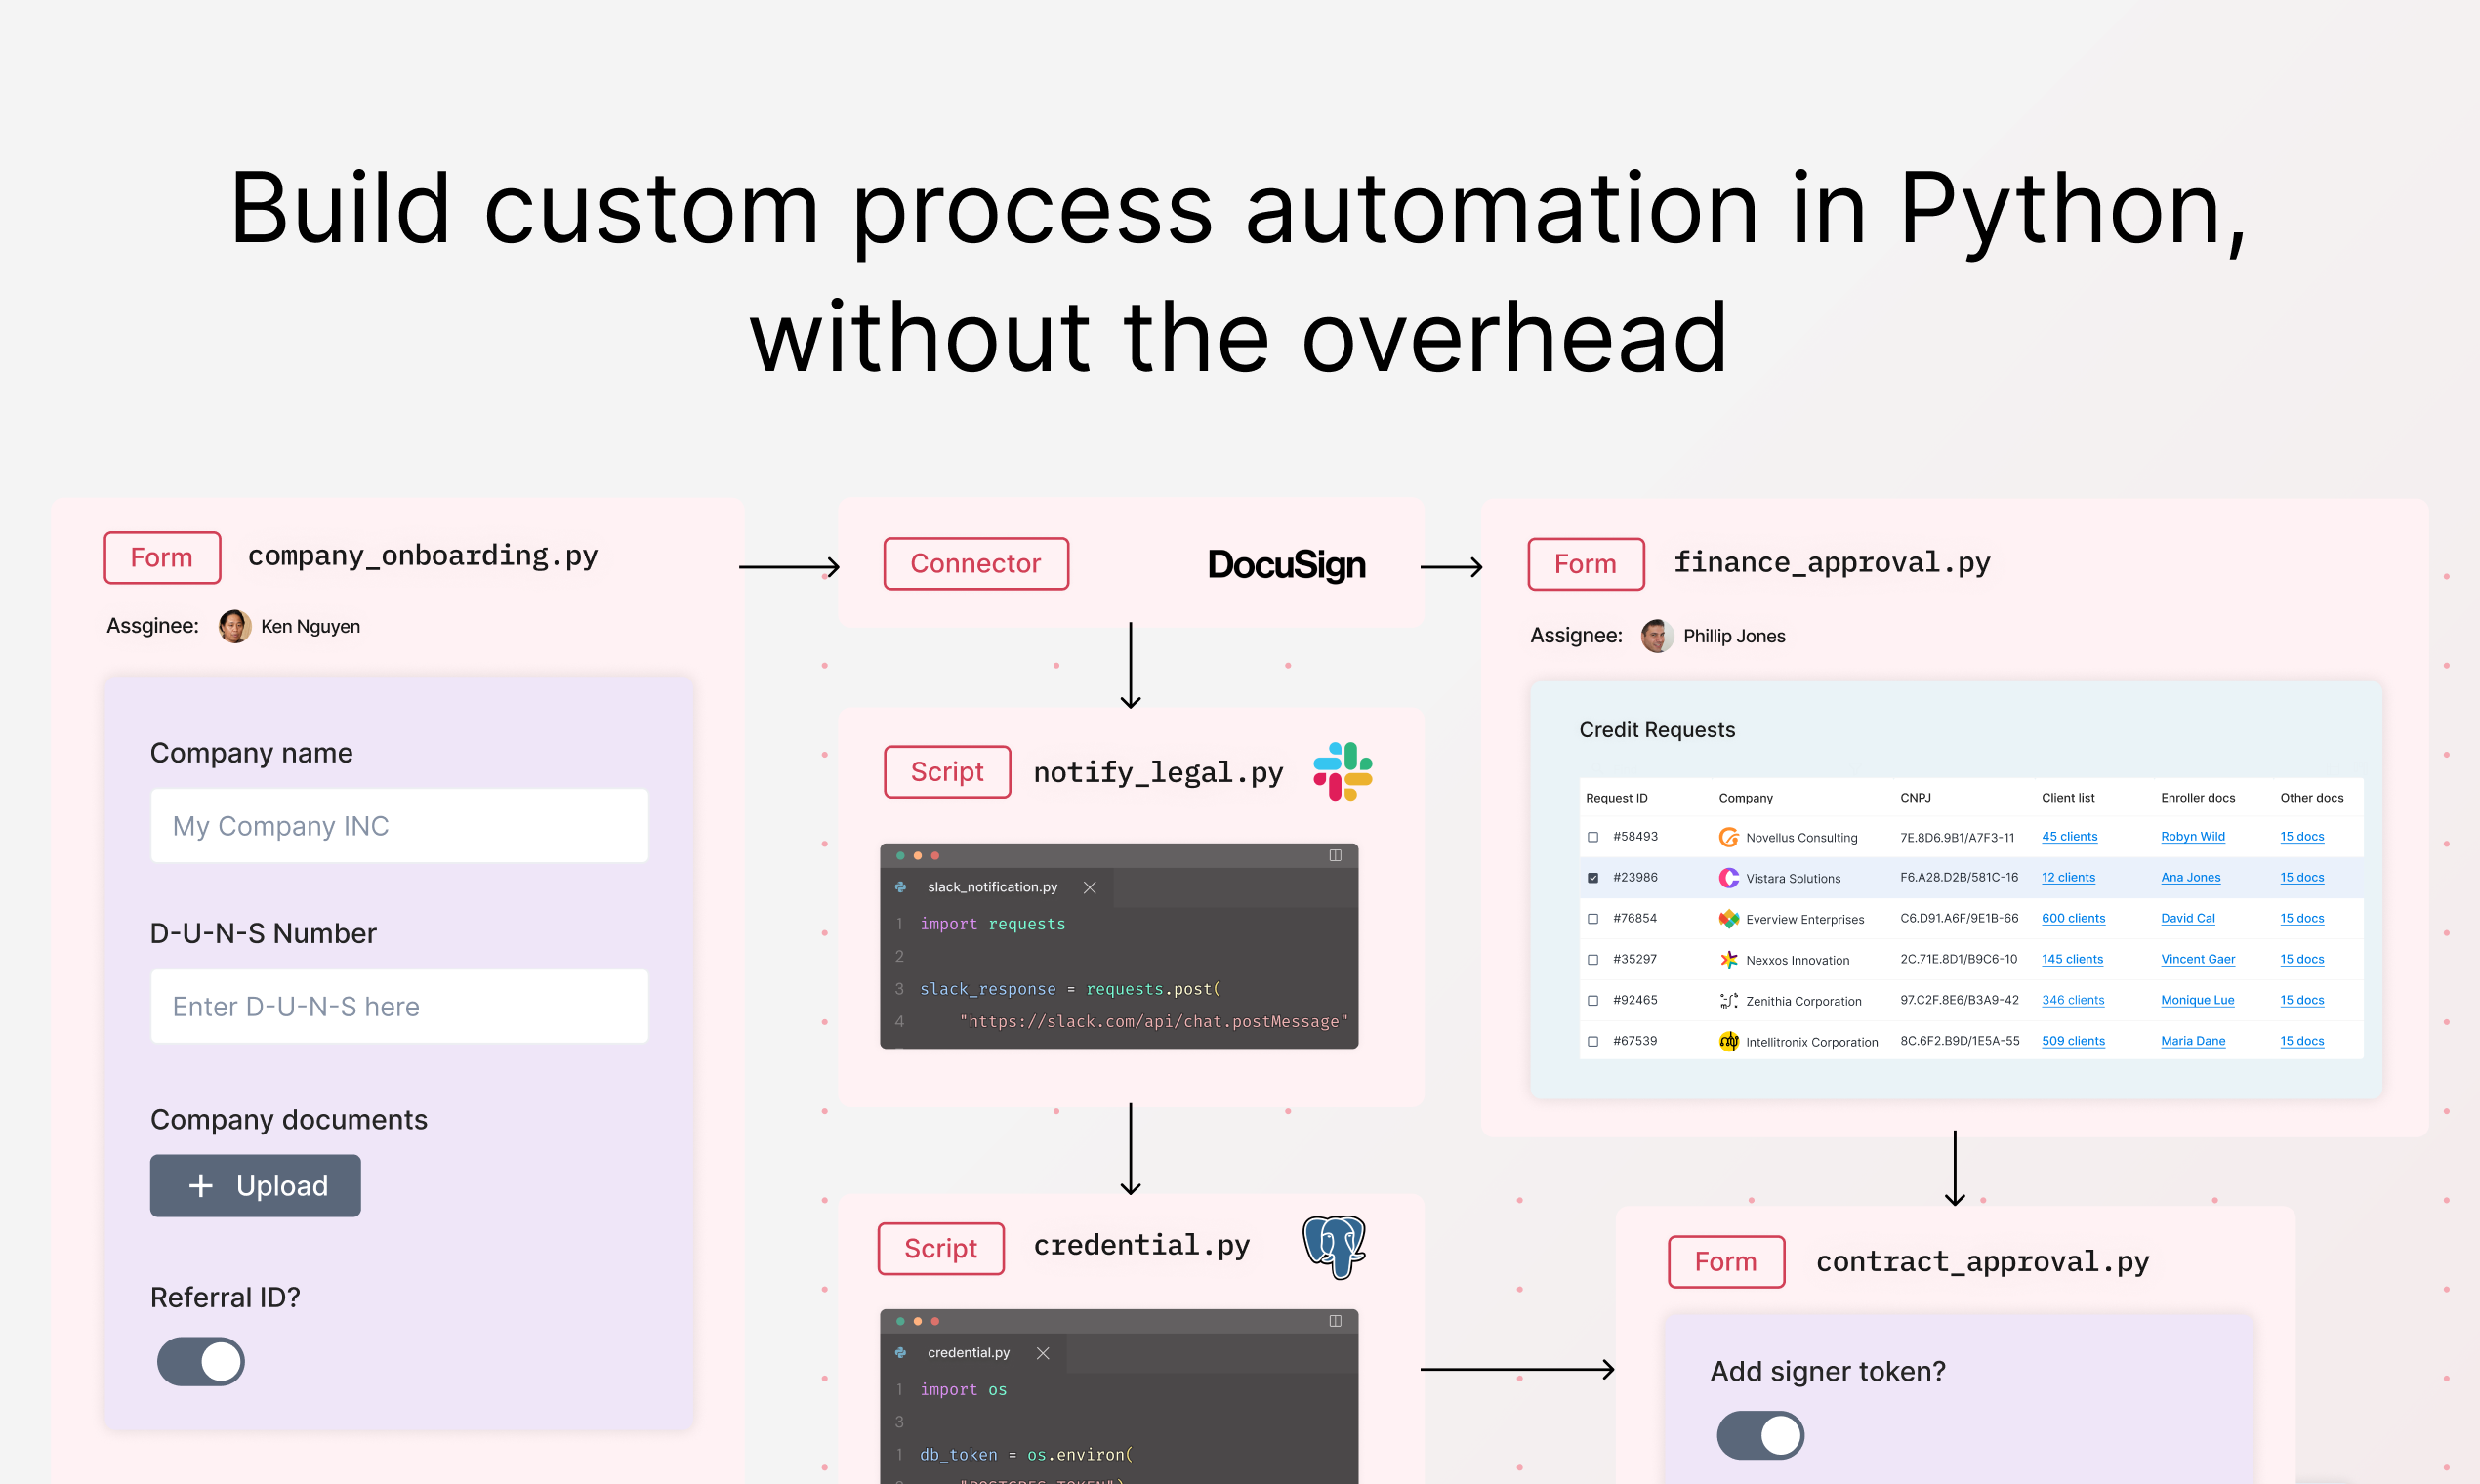 abstra-workflows - Scale critical business processes with Python + AI